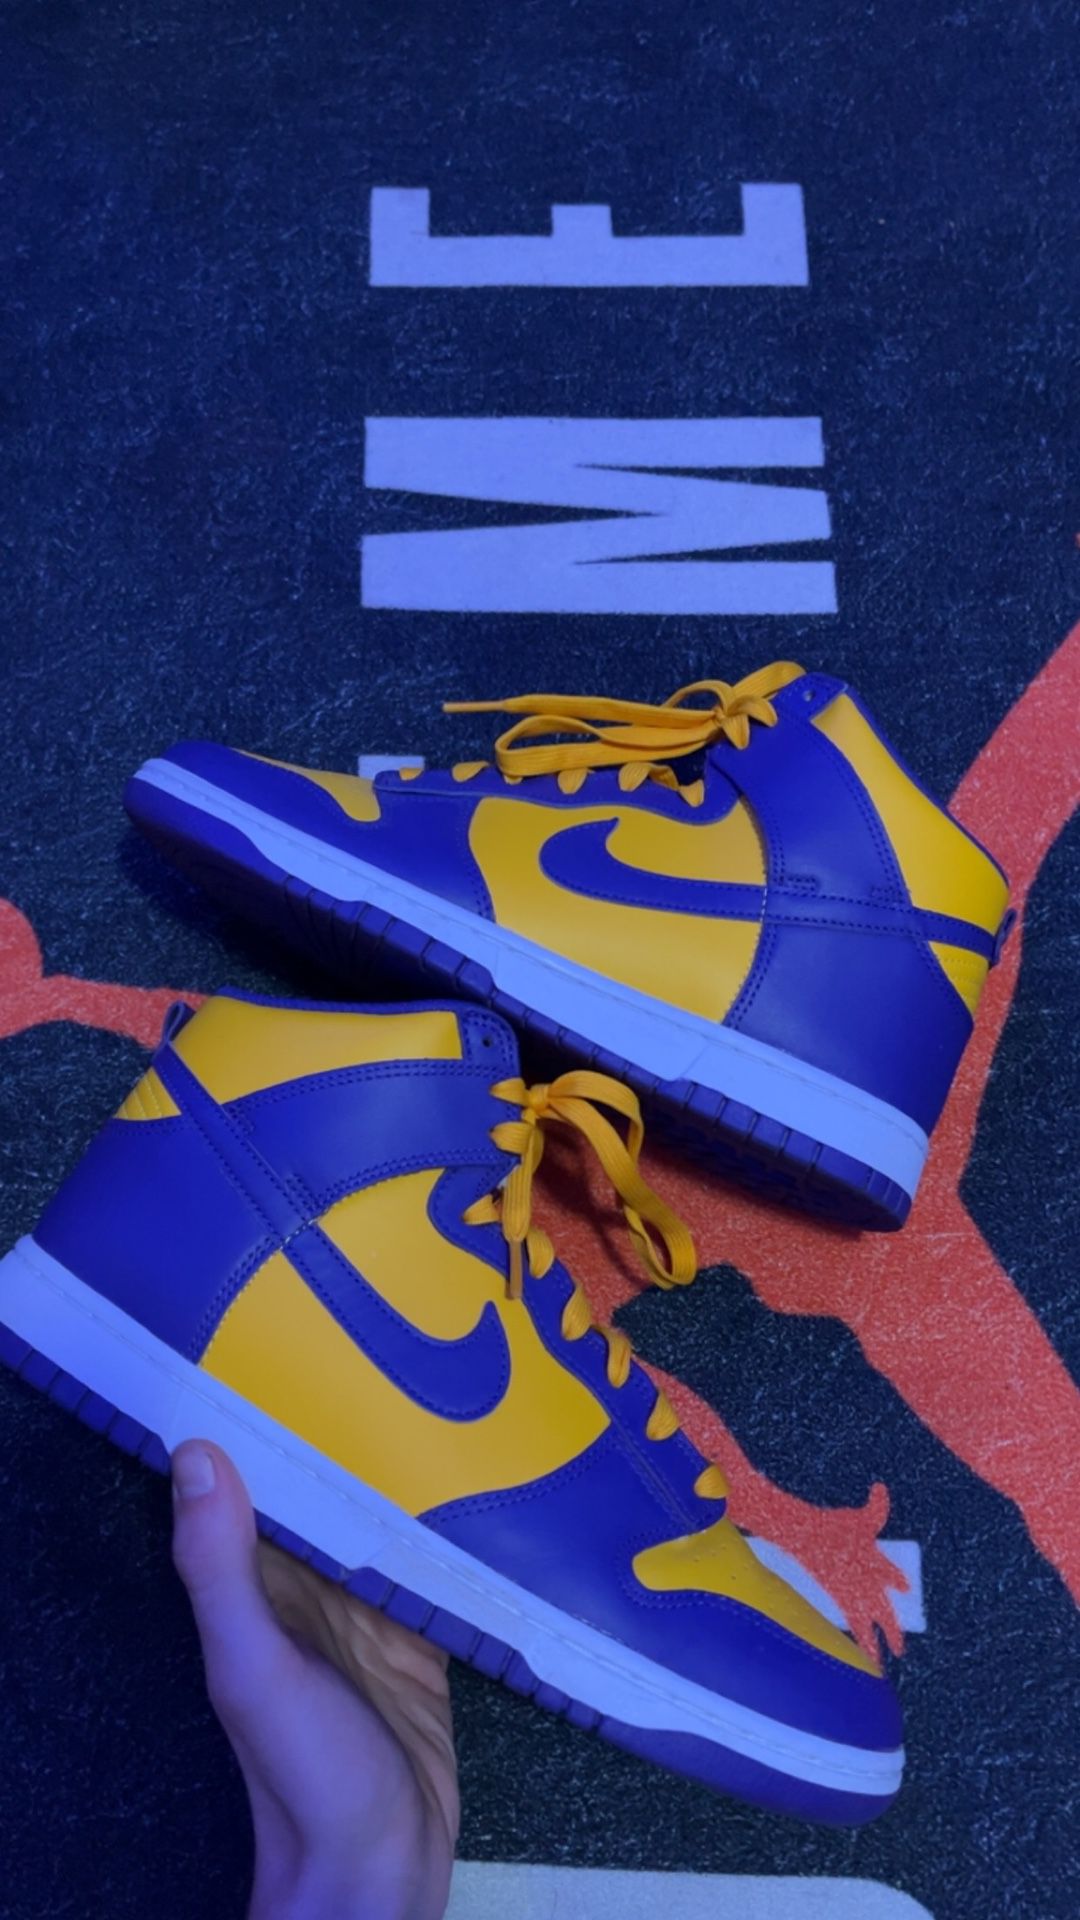 Nike Air Dunk High Court Purple Yellow "Lakers" Size 10 New Rare 